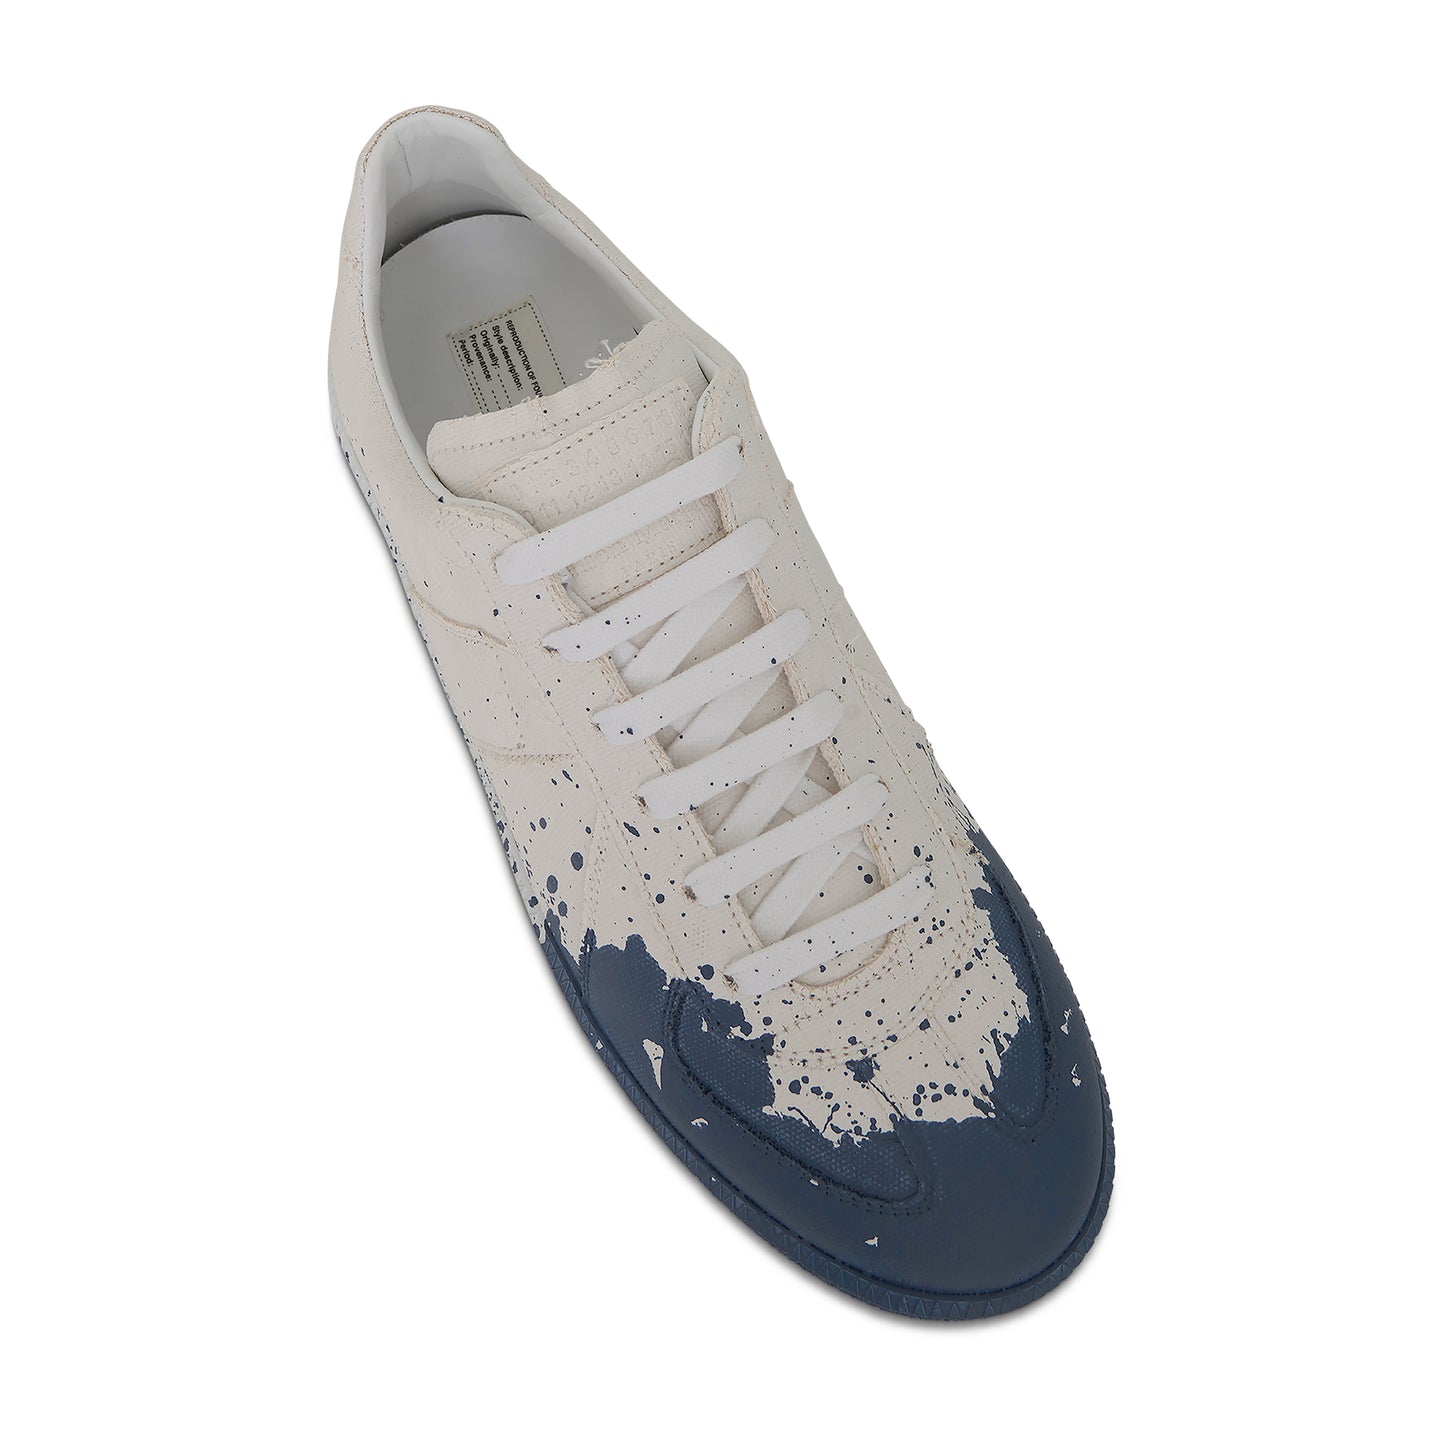 Replica Painter Low Sneakers in White/Ming